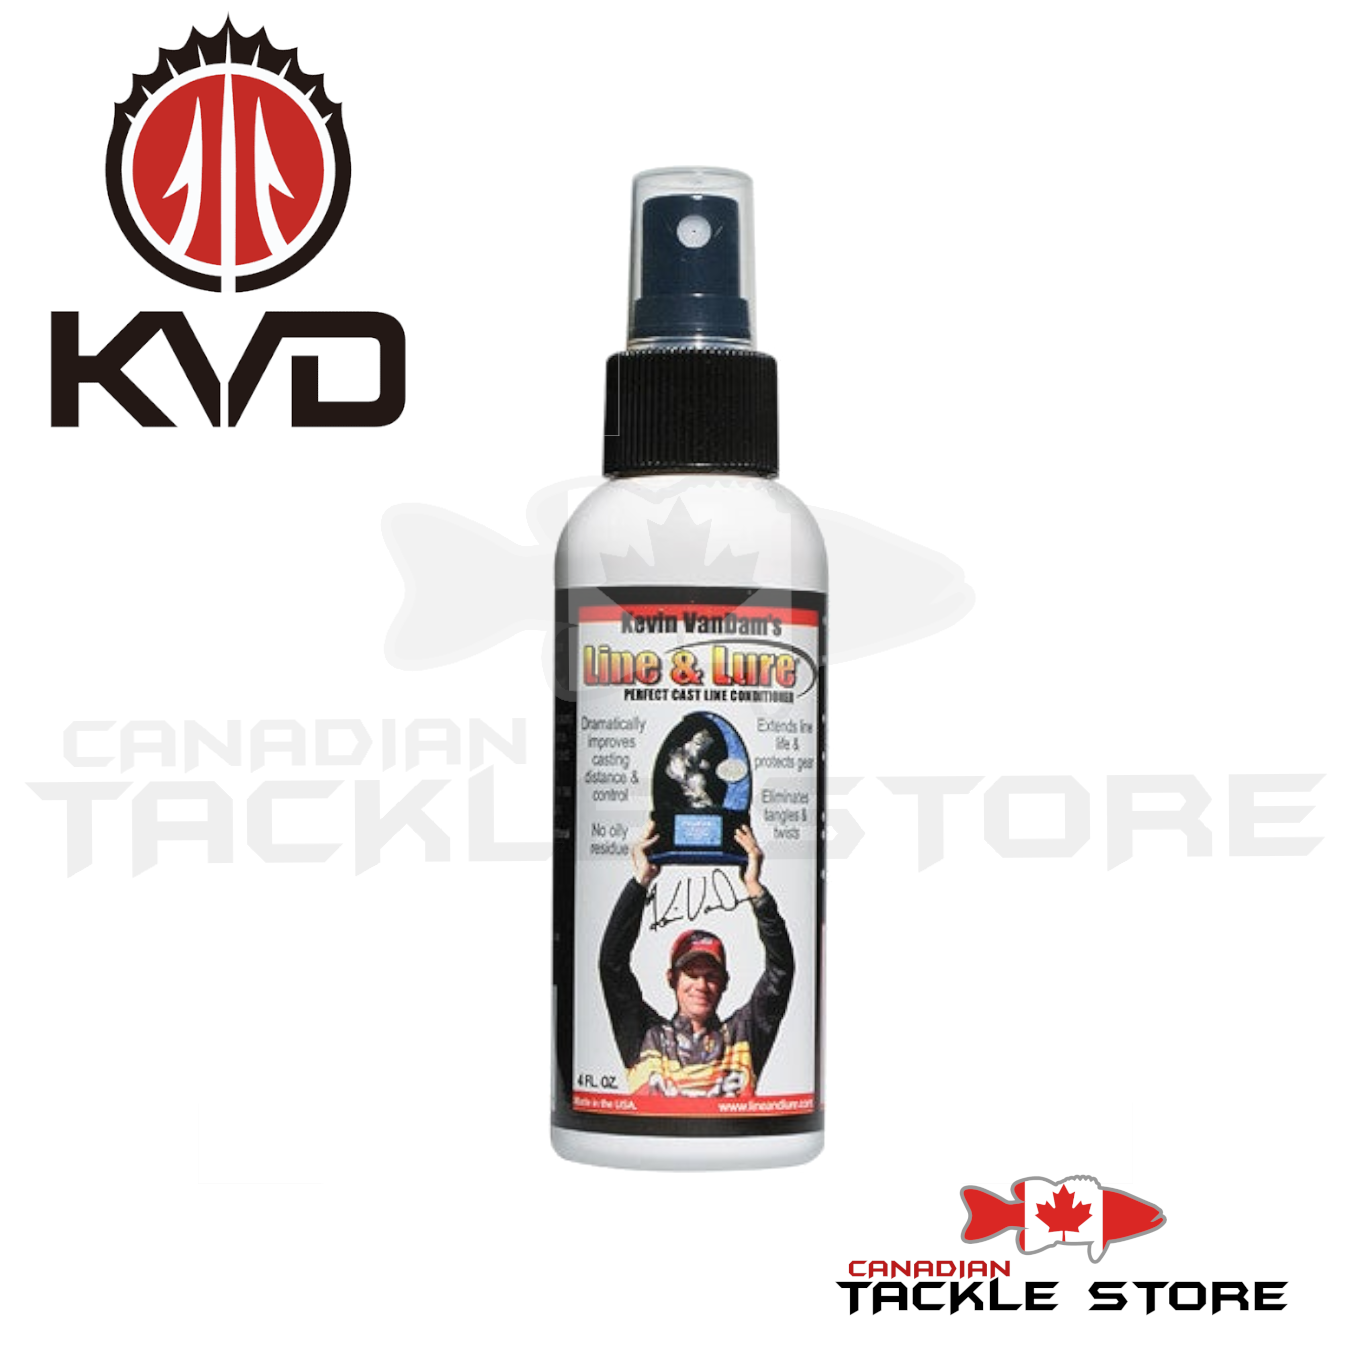 Fluorocarbon – Canadian Tackle Store